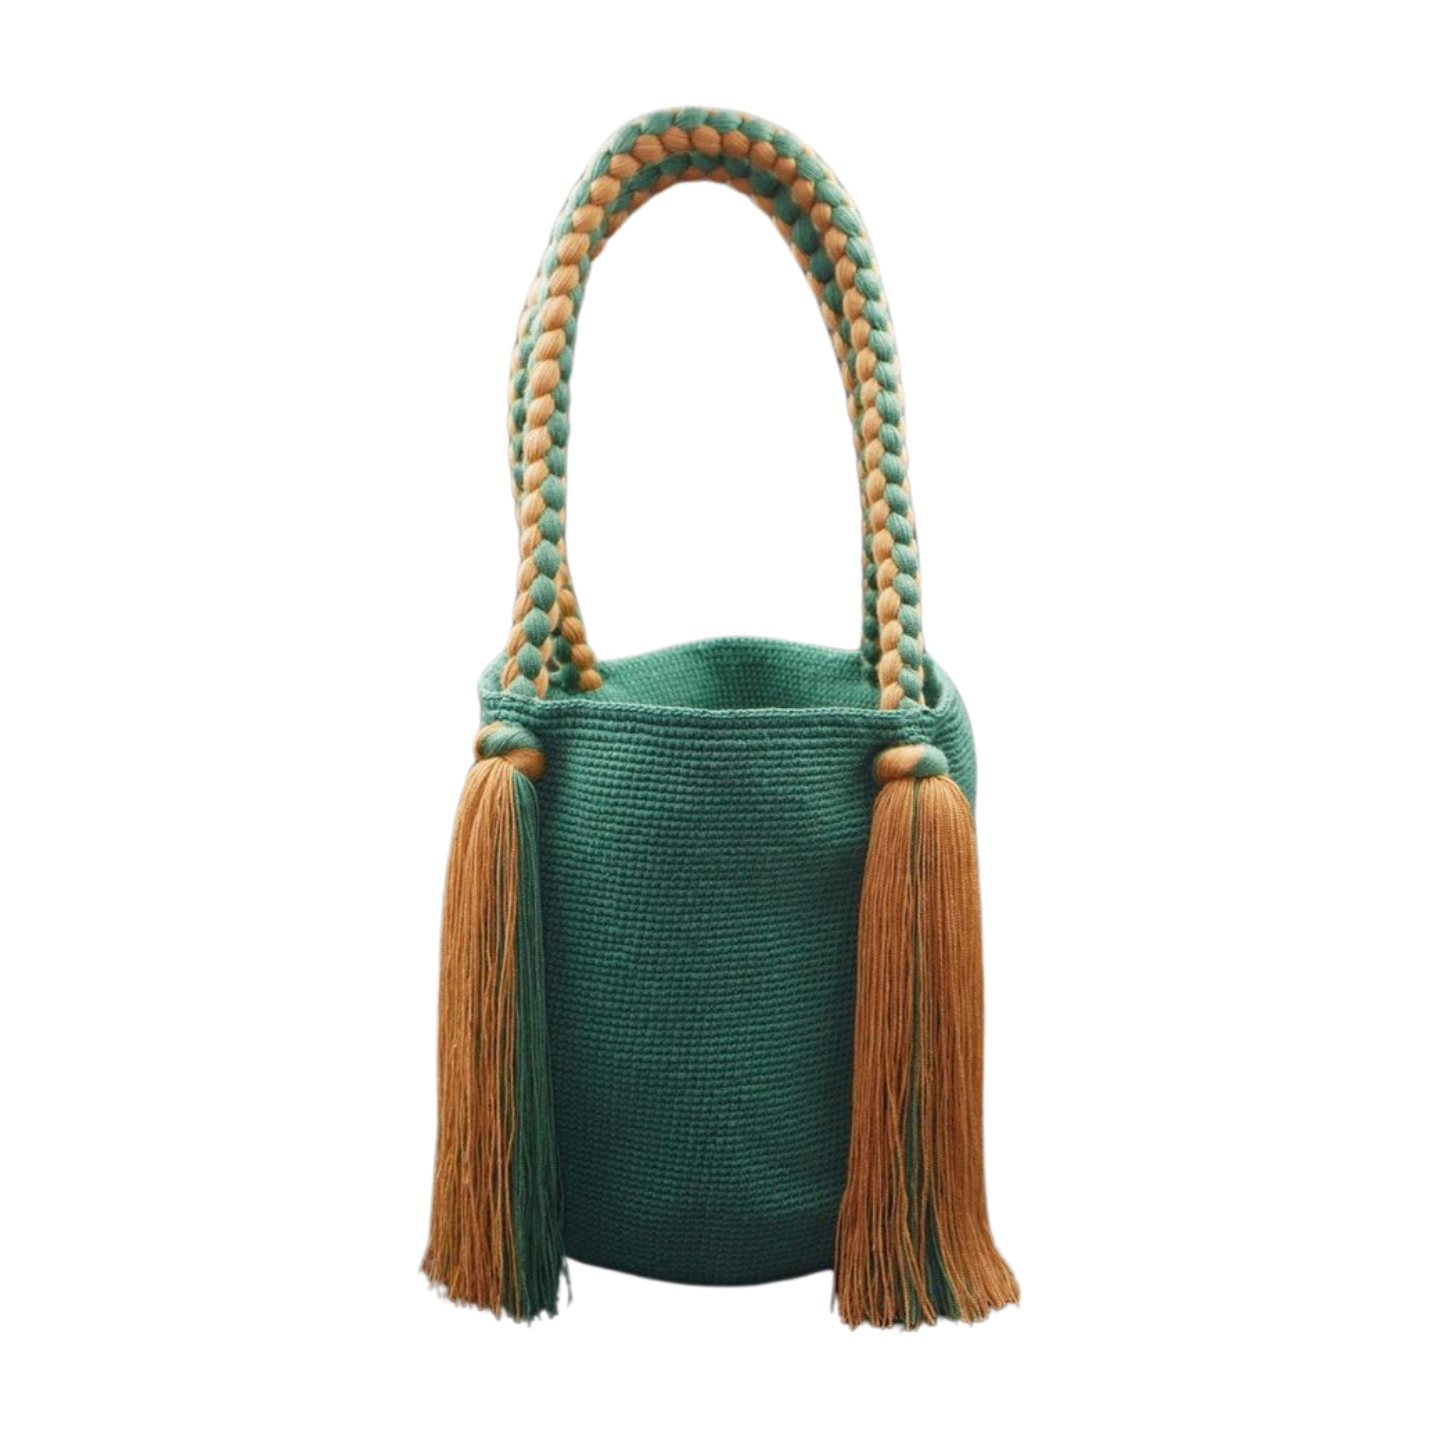 Handmade Teal Tote Bag with Long Tassels. The handles is weaved together in a plait